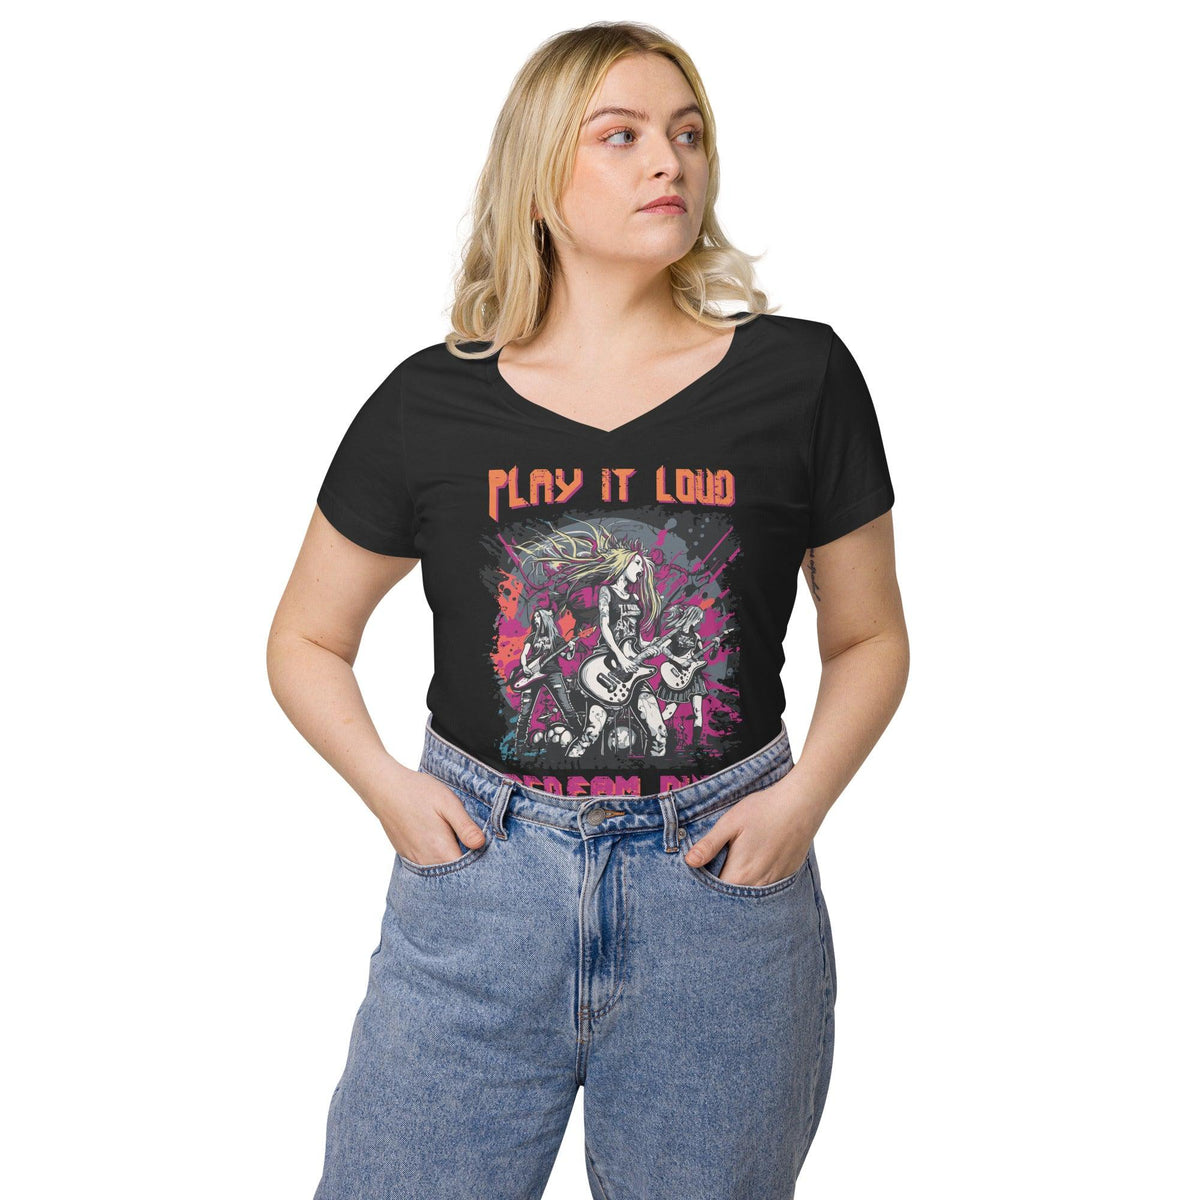 Play It Loud Women’s fitted v-neck t-shirt - Beyond T-shirts